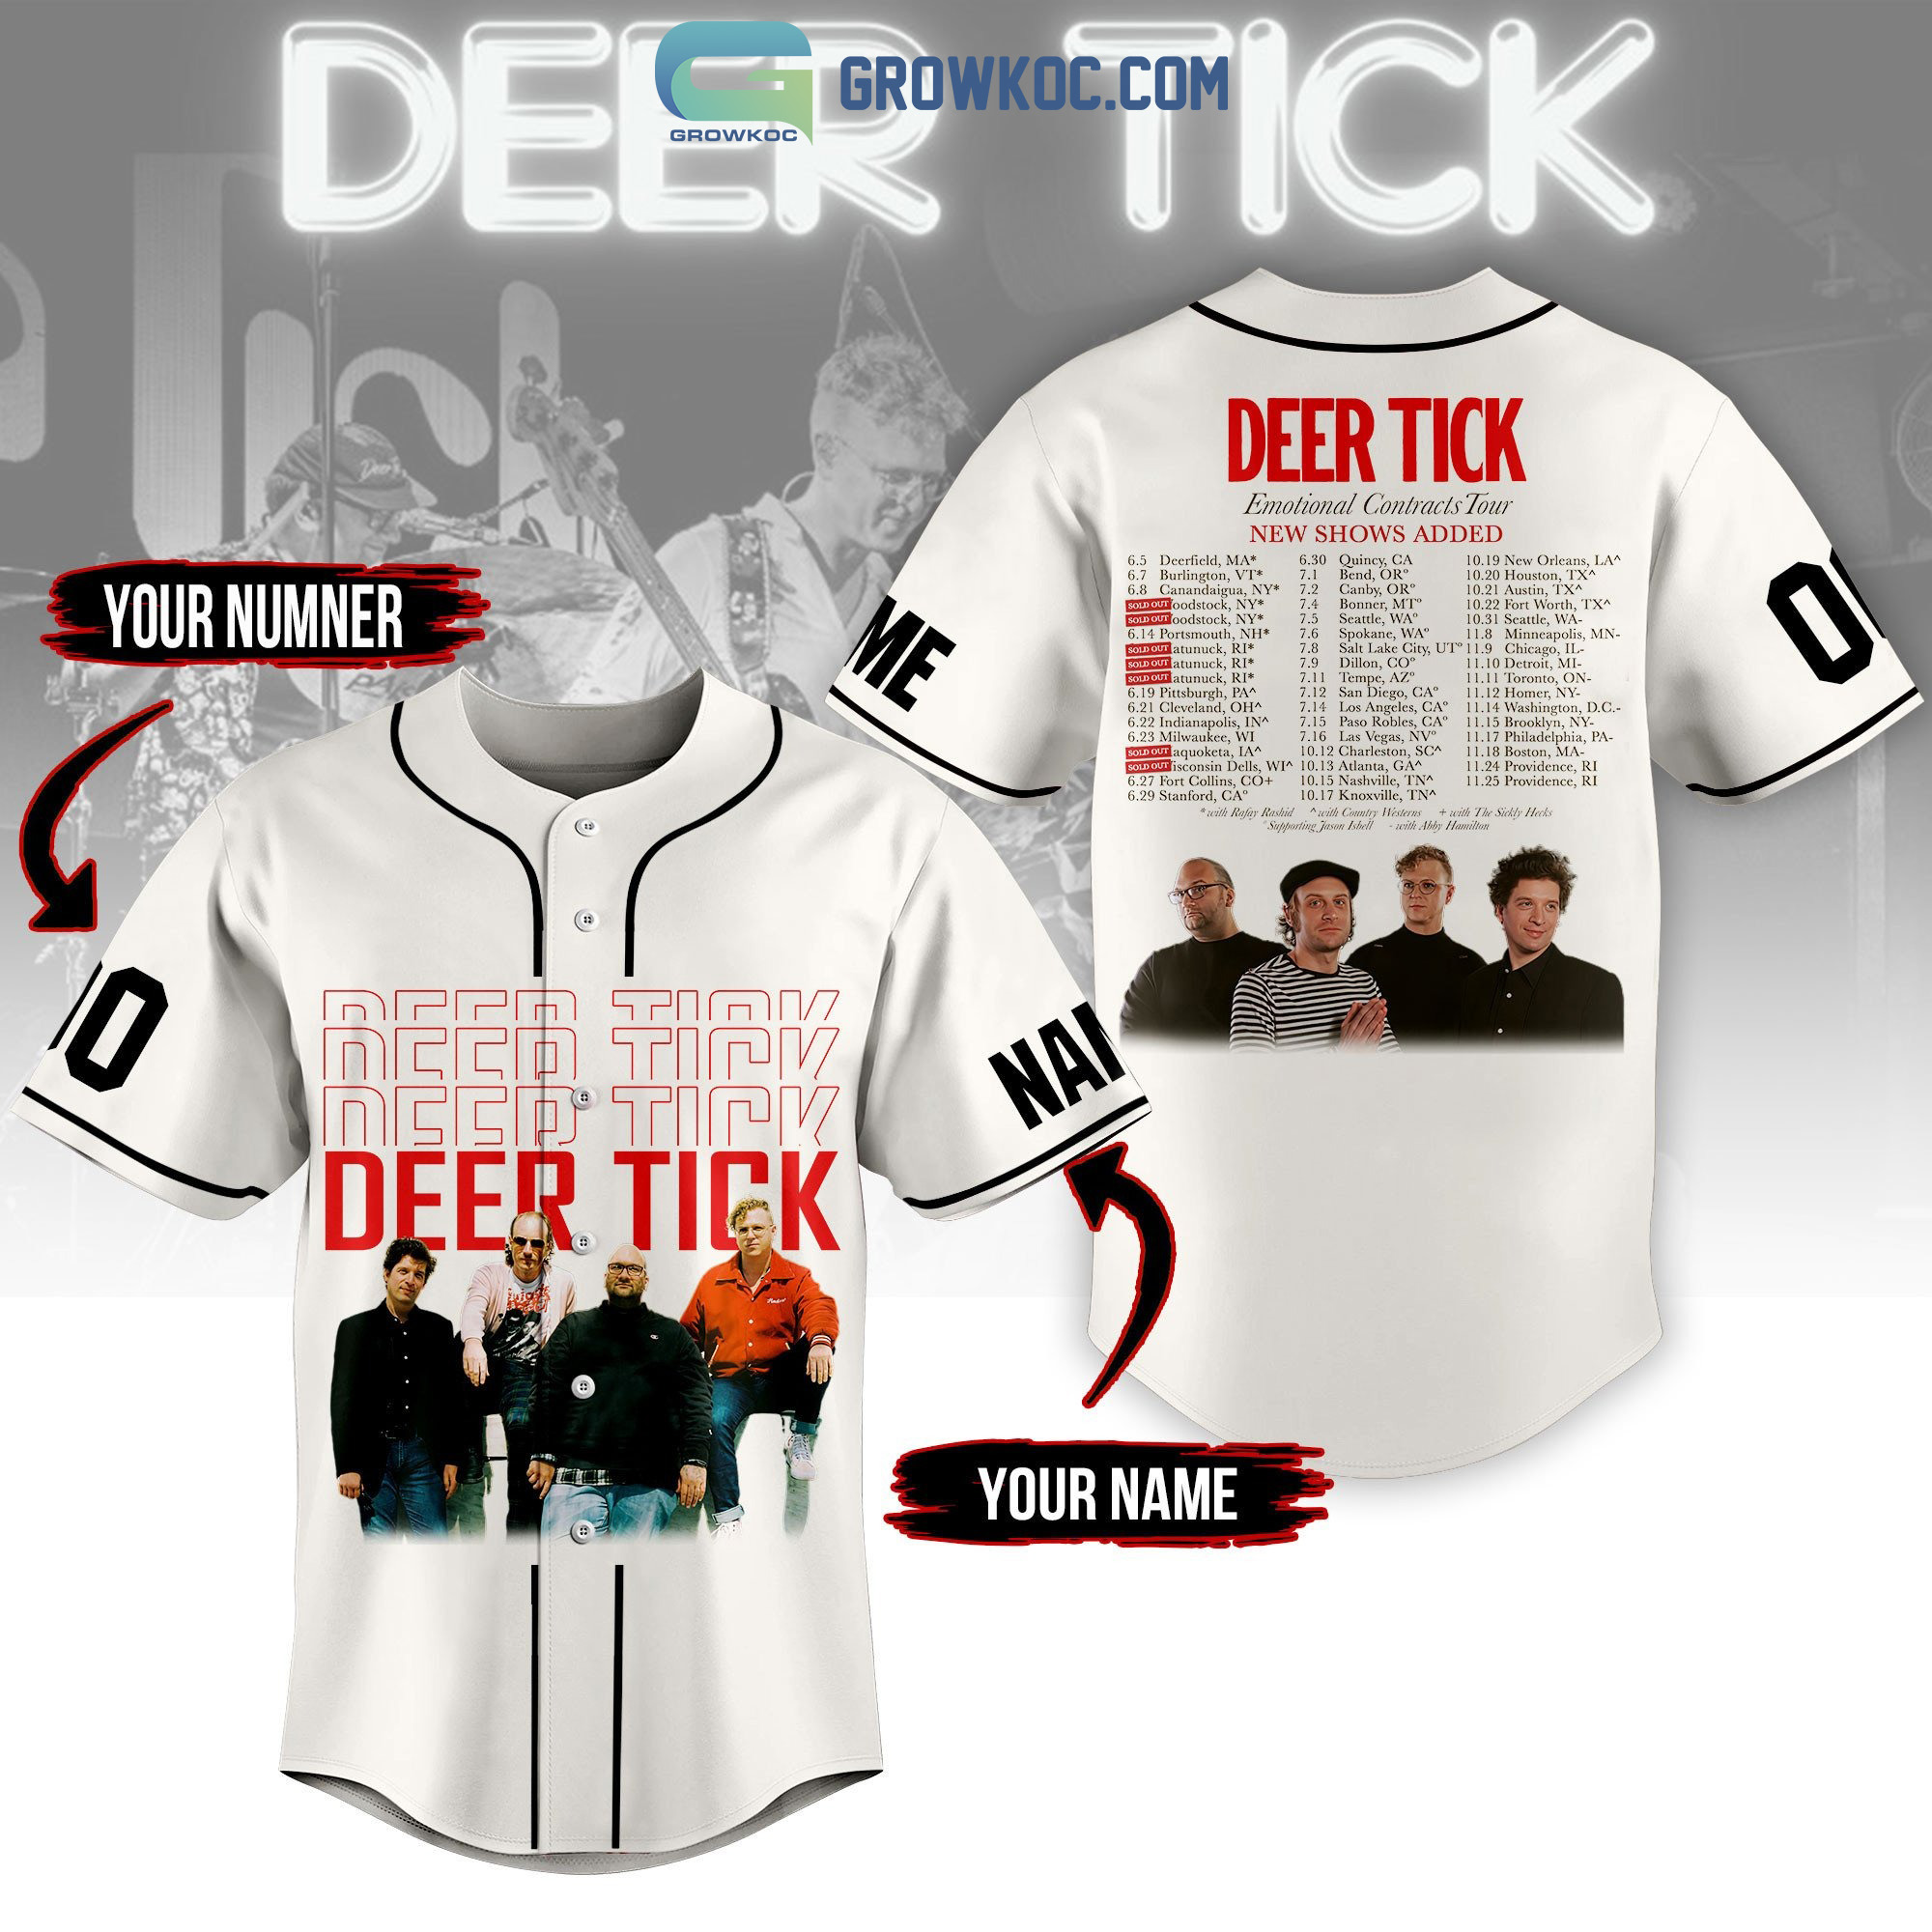 Deer Tick Emotional Contracts Tour Personalized White Design Baseball Jersey  - Growkoc